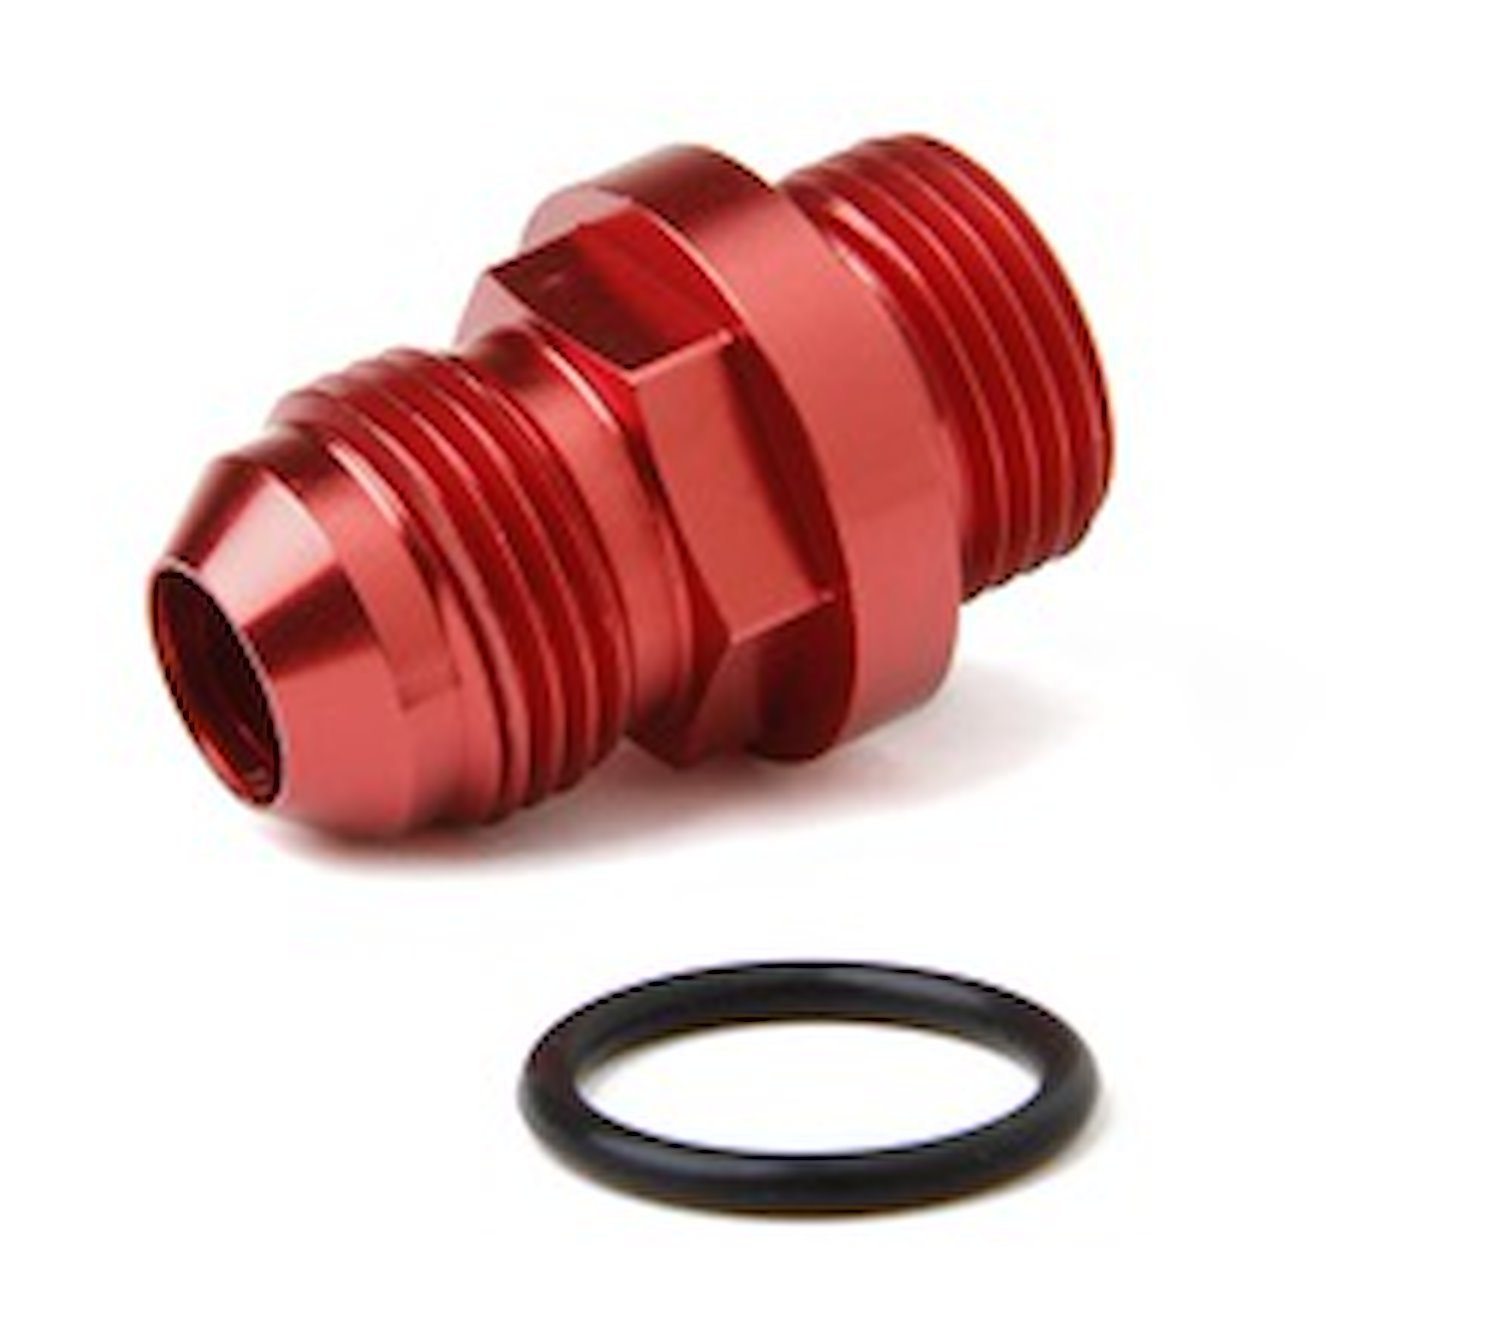 26-143-2 Fuel Inlet Fitting Short -8 AN Male for 4150 Ultra XP Fuel Bowls [Red]